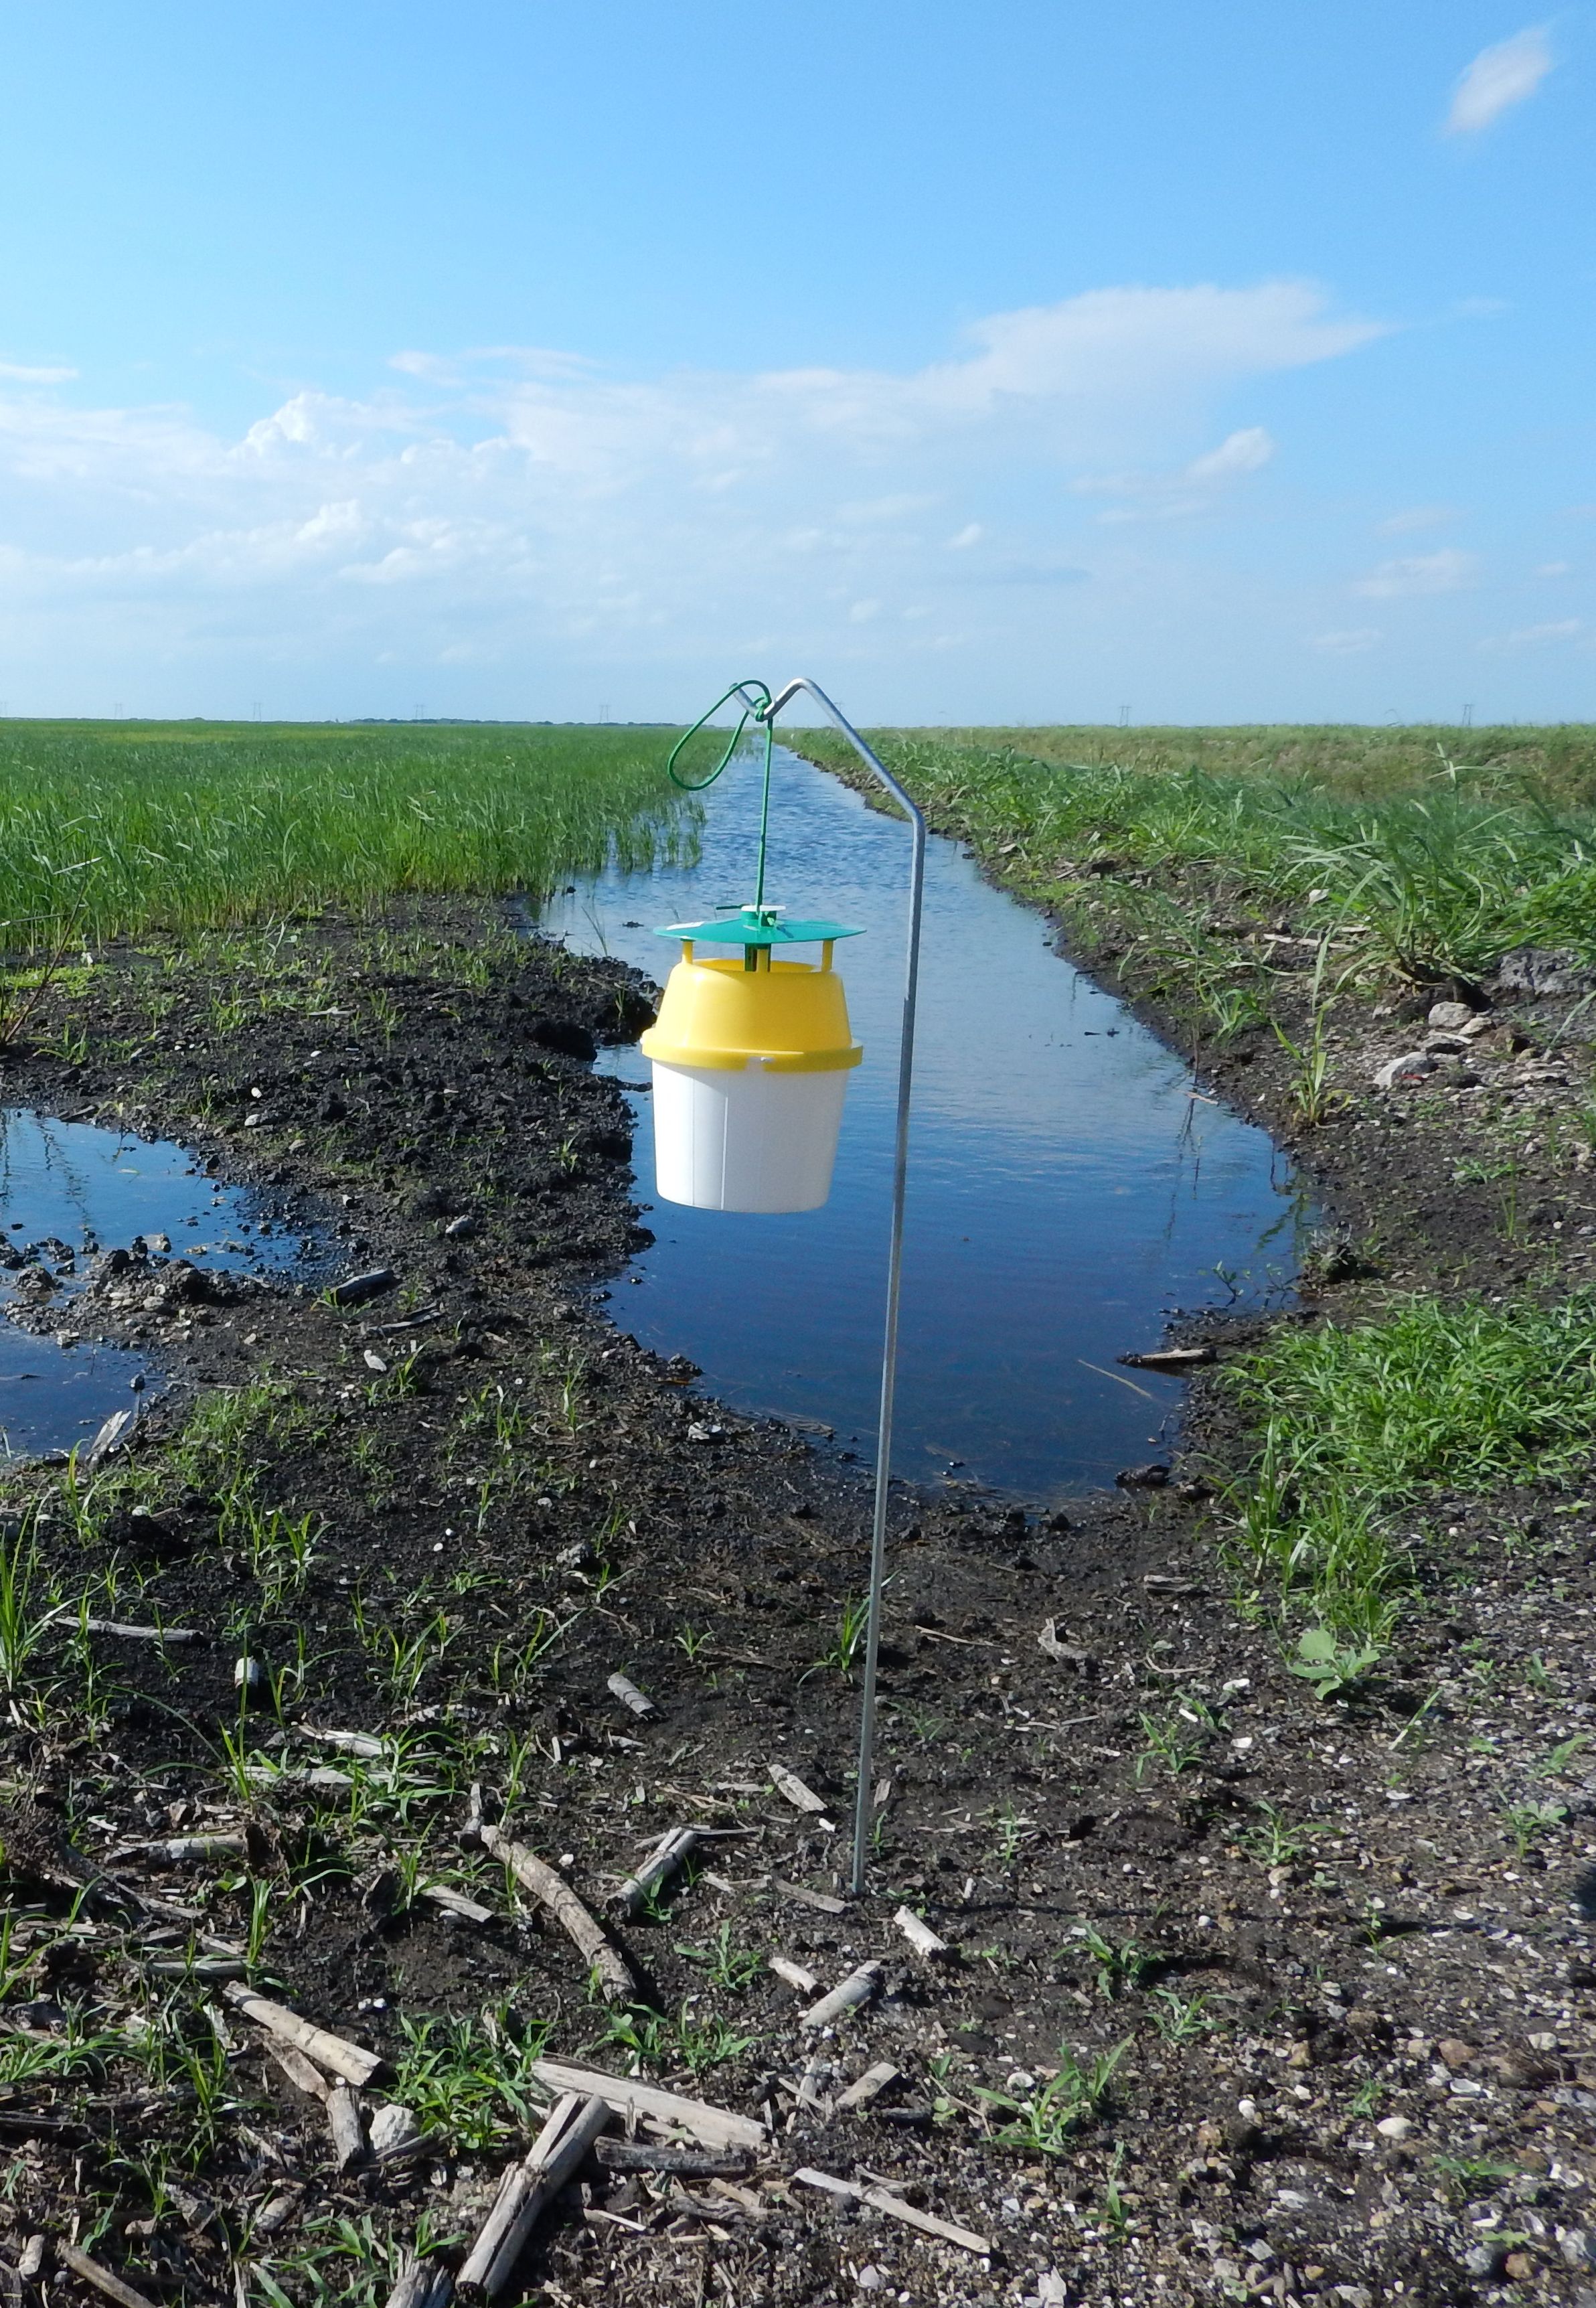 Pheromone trap for Mexican rice borer adult monitoring near a rice field. 